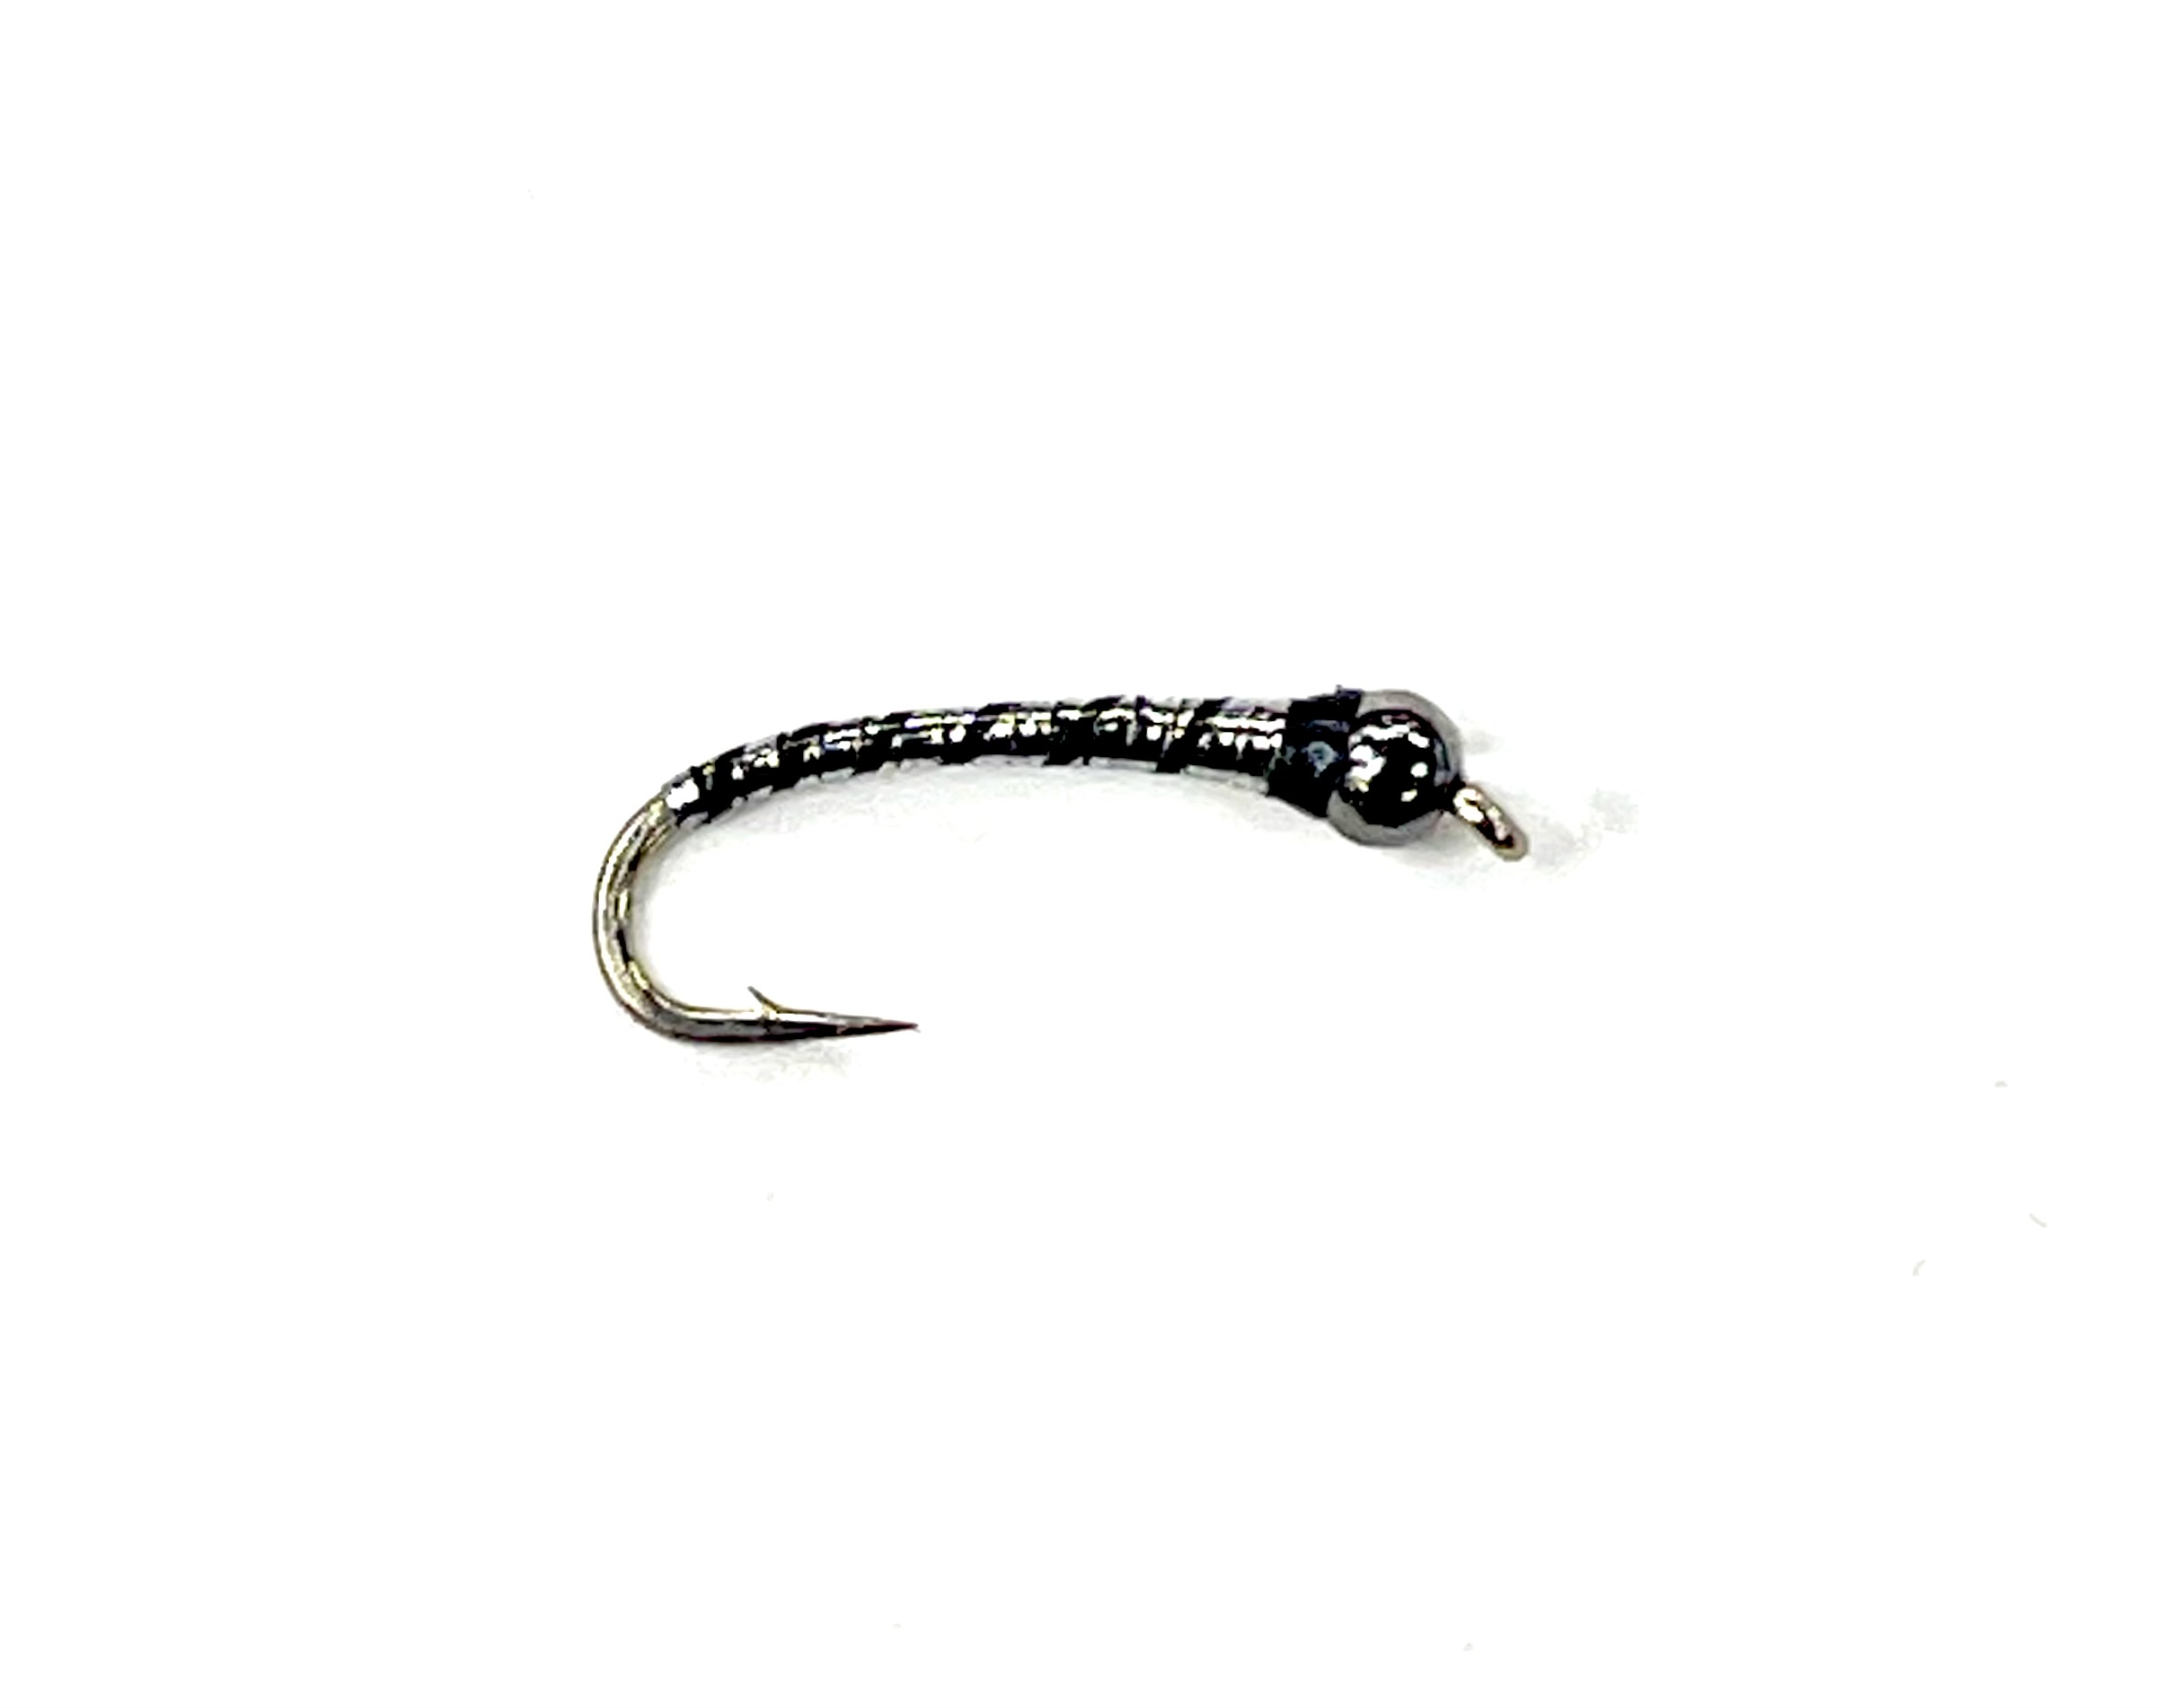 M&Y Static Bag Chironomid - Size 14